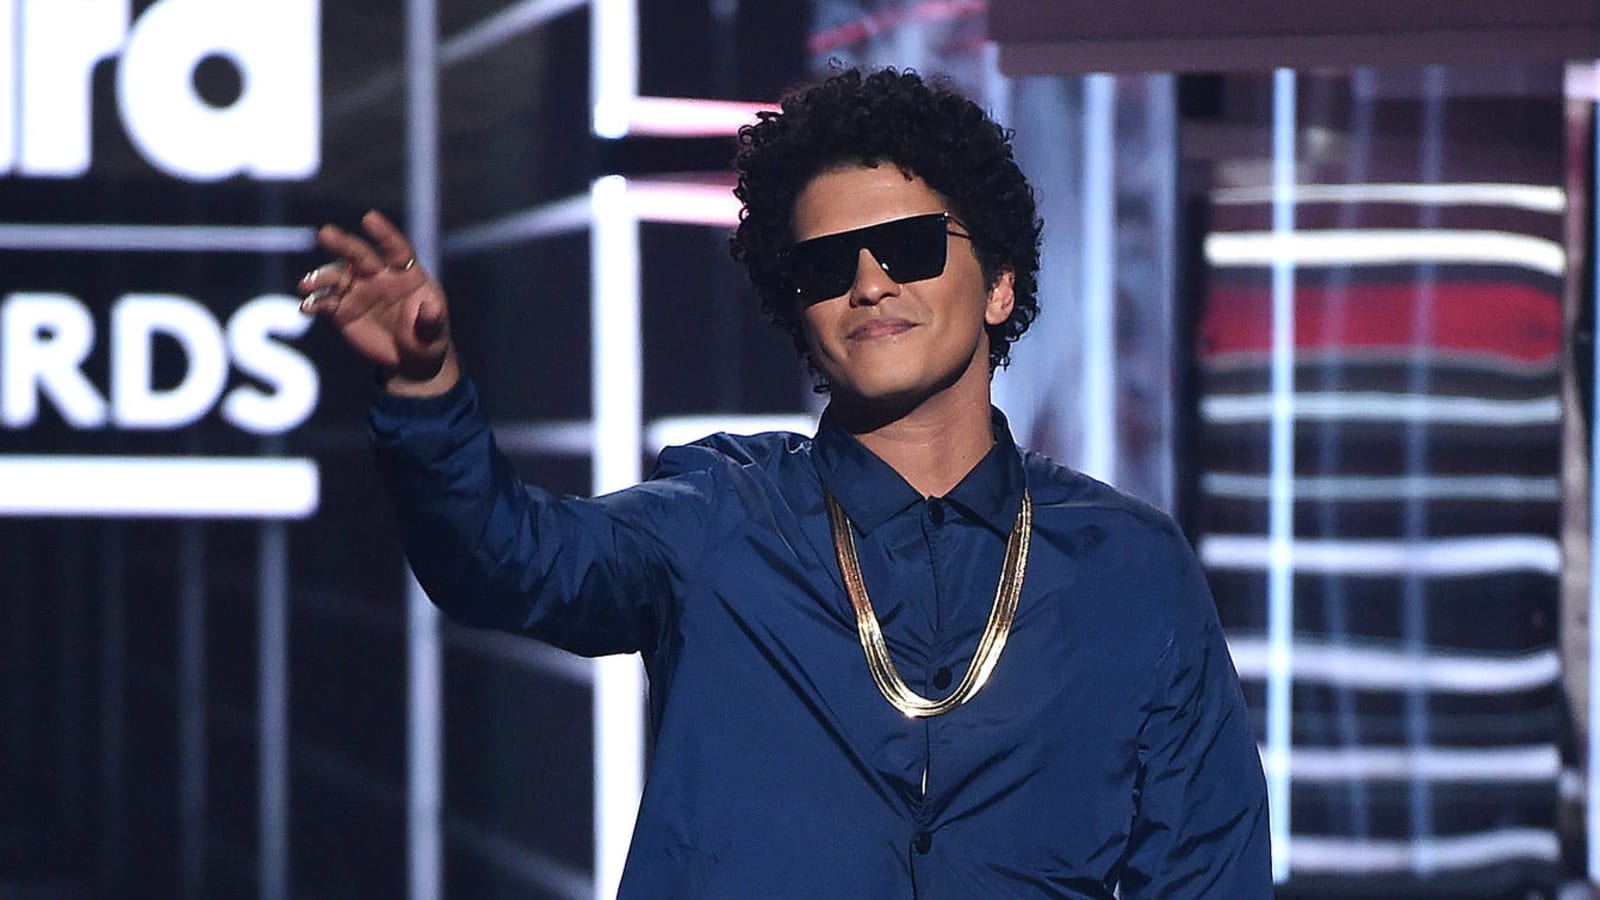 Watch Bruno Mars 'be extra' at his Grammys after party